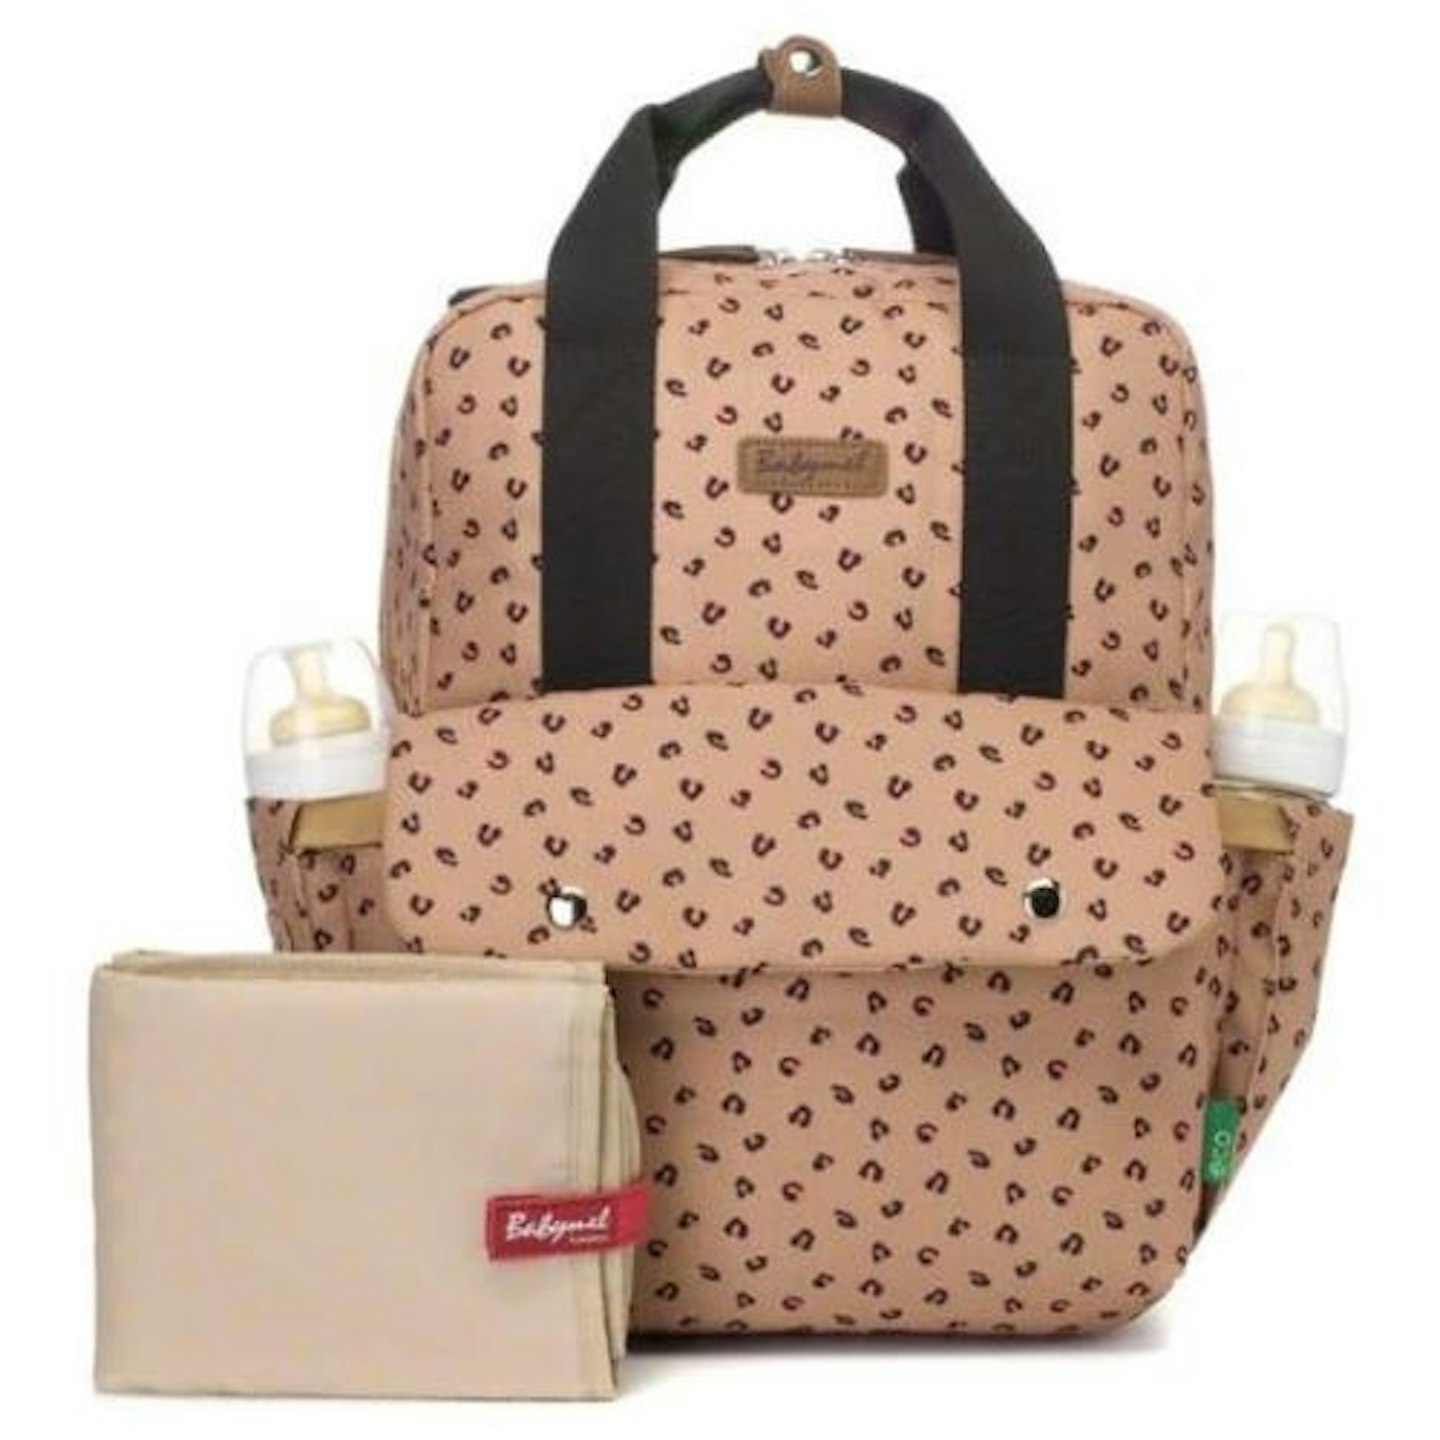 20 of the best baby changing bags - Changing bags for babies